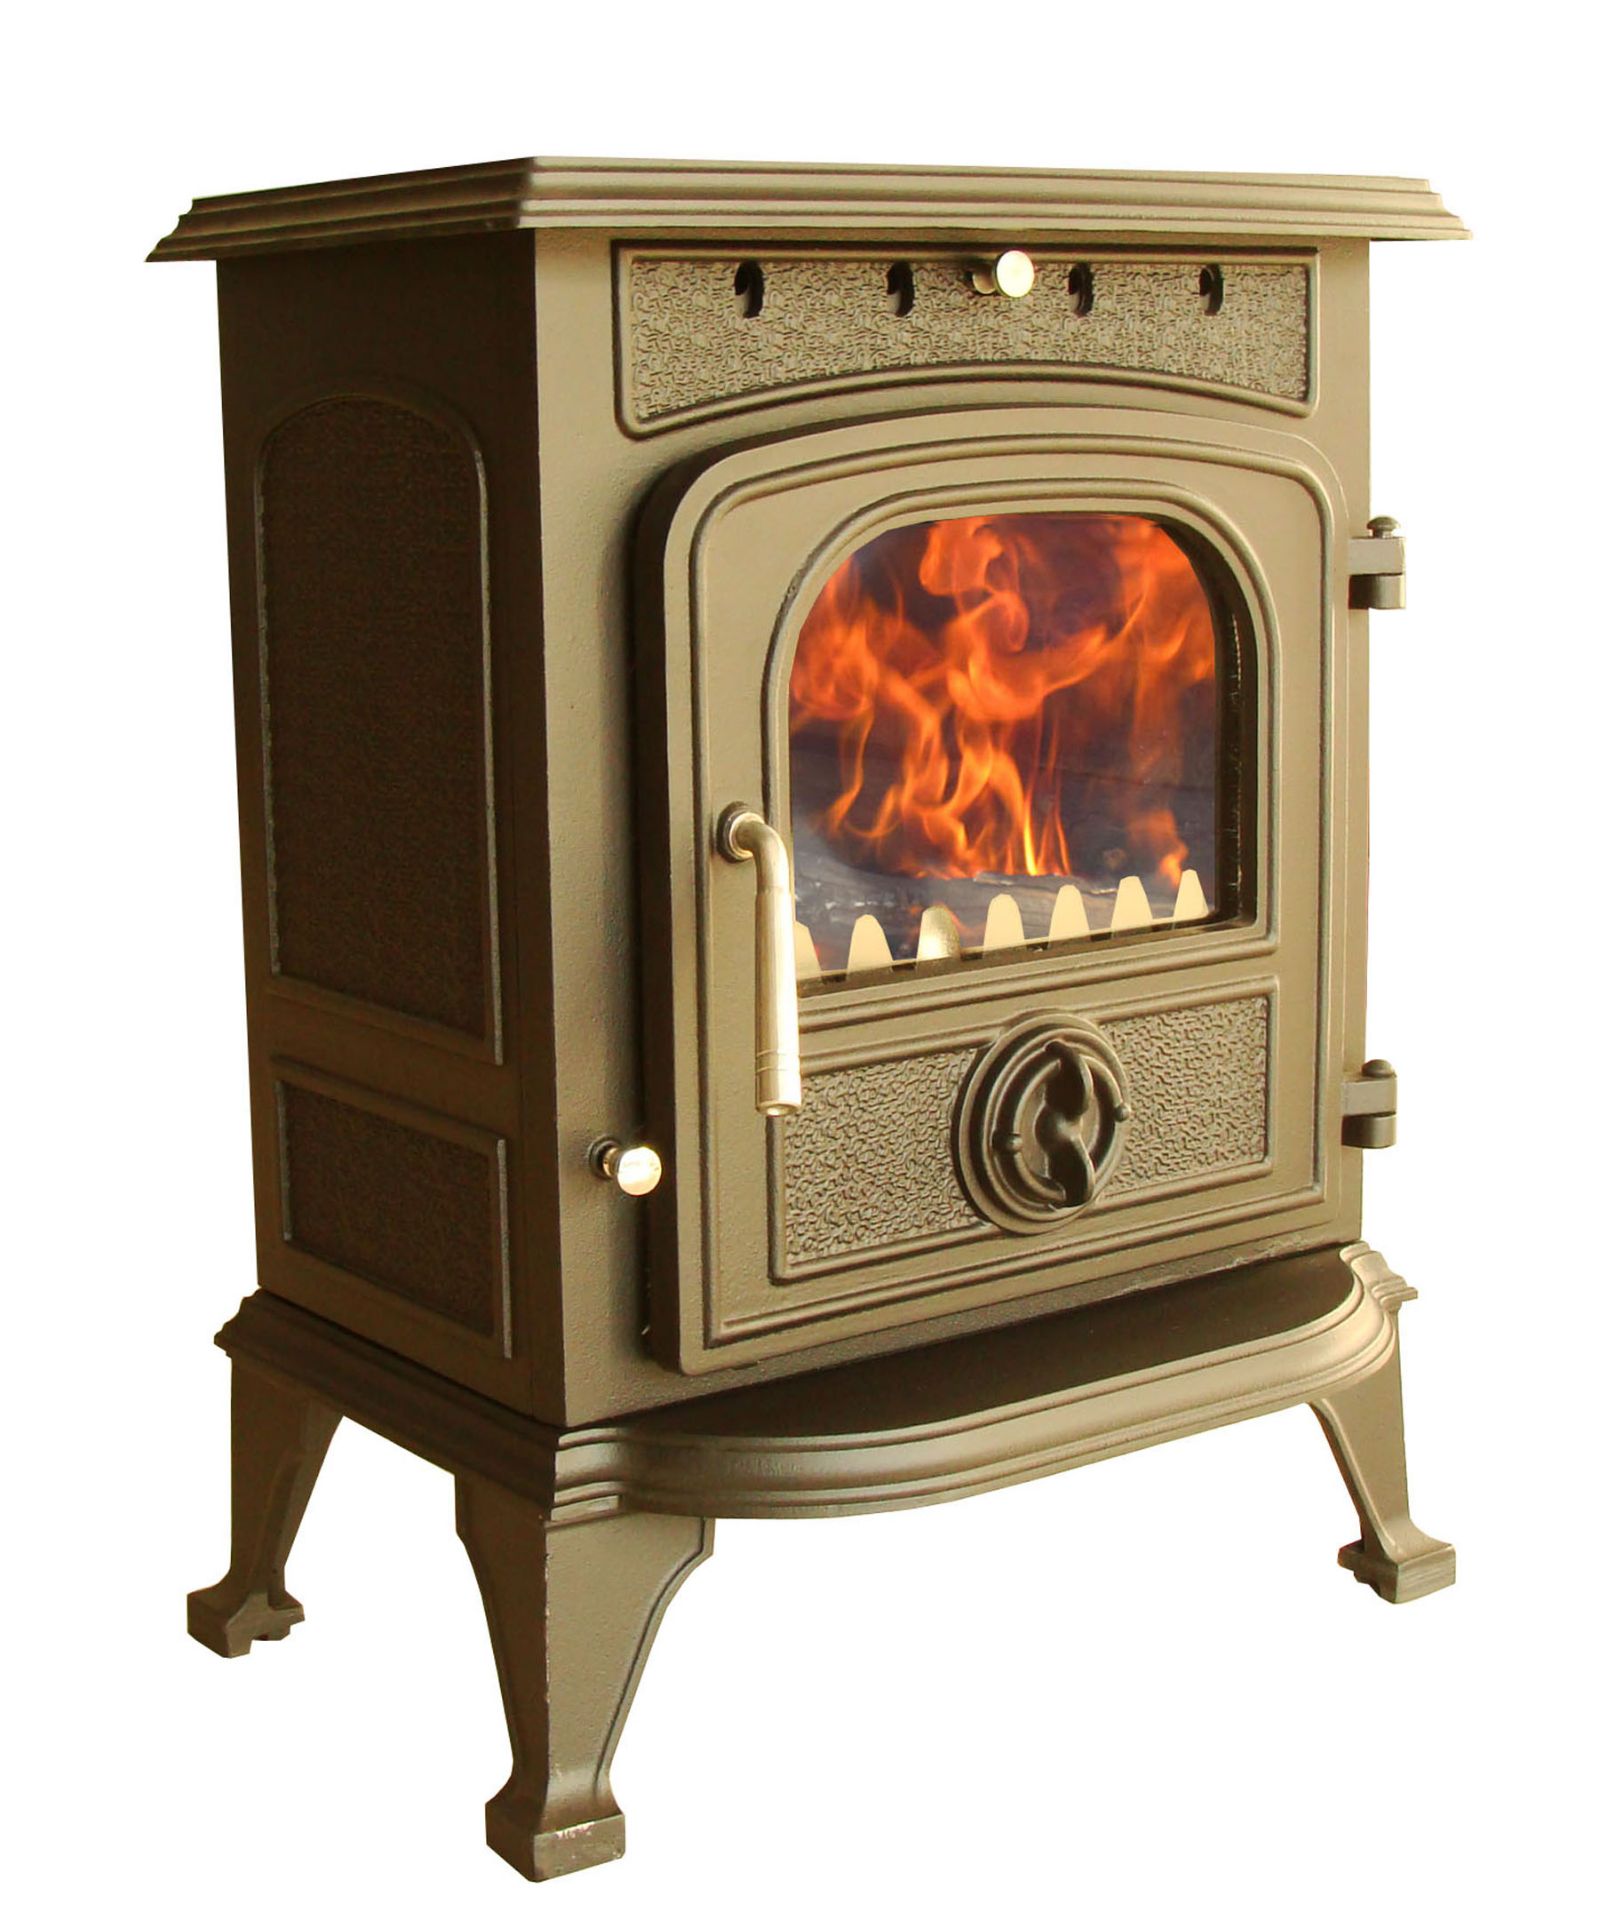 6KW BRAND NEW CRATED CAST IRON MULTI FUEL WOOD BURNING STOVE